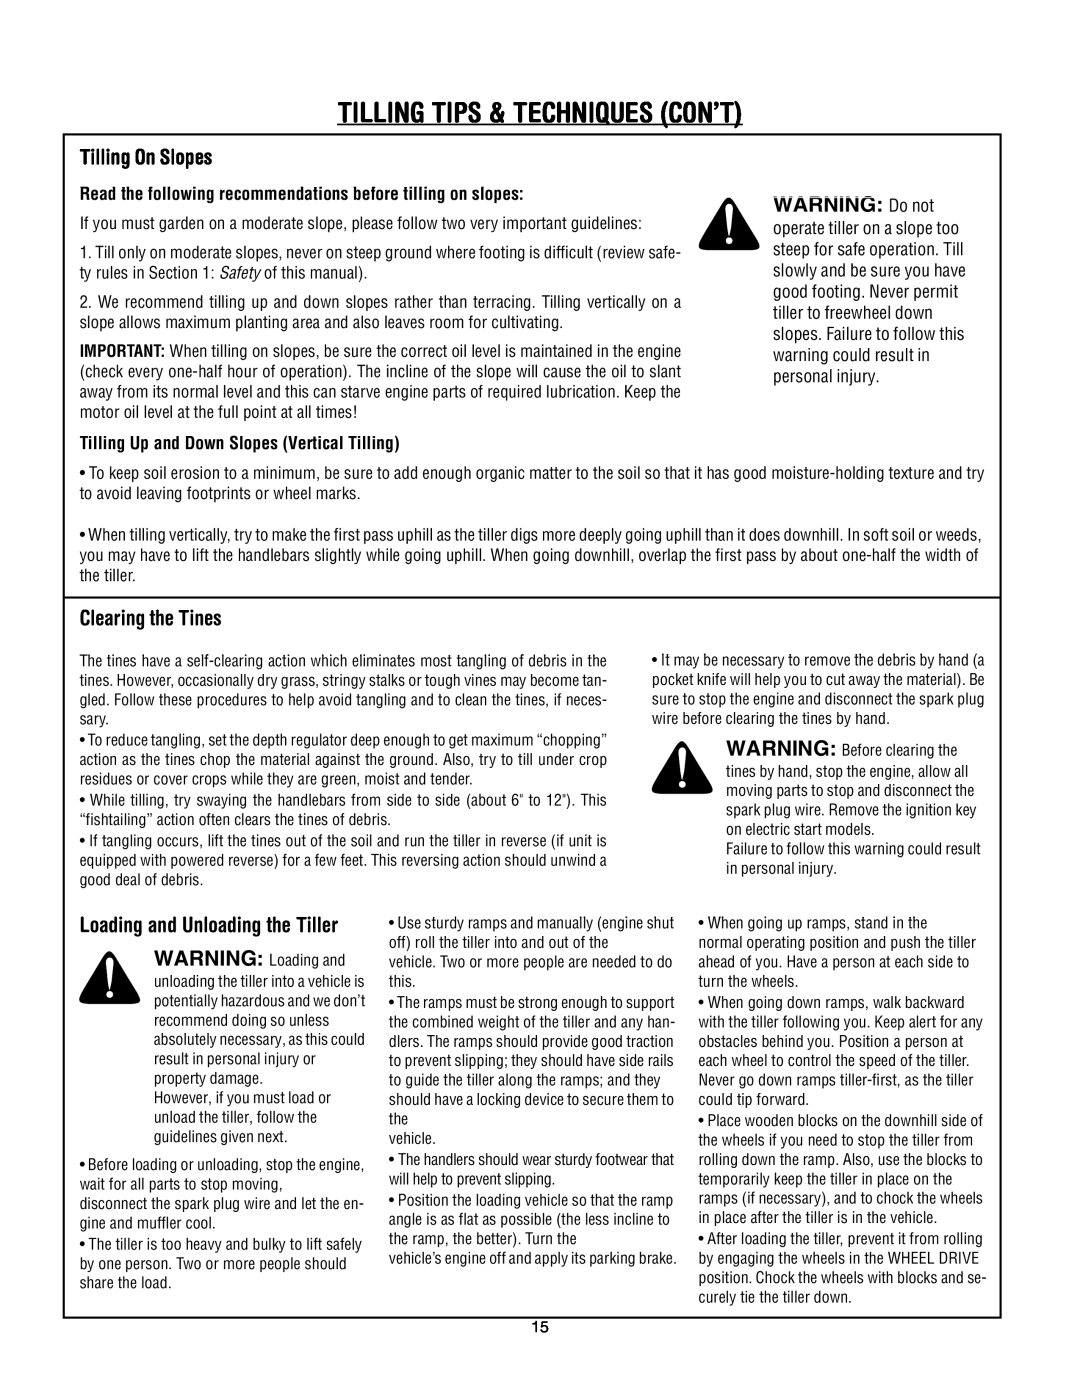 Troy-Bilt 643C Tuffy/Bronco manual Tilling Tips & Techniques Con’T, Tilling On Slopes, WARNING: Do not, Clearing the Tines 